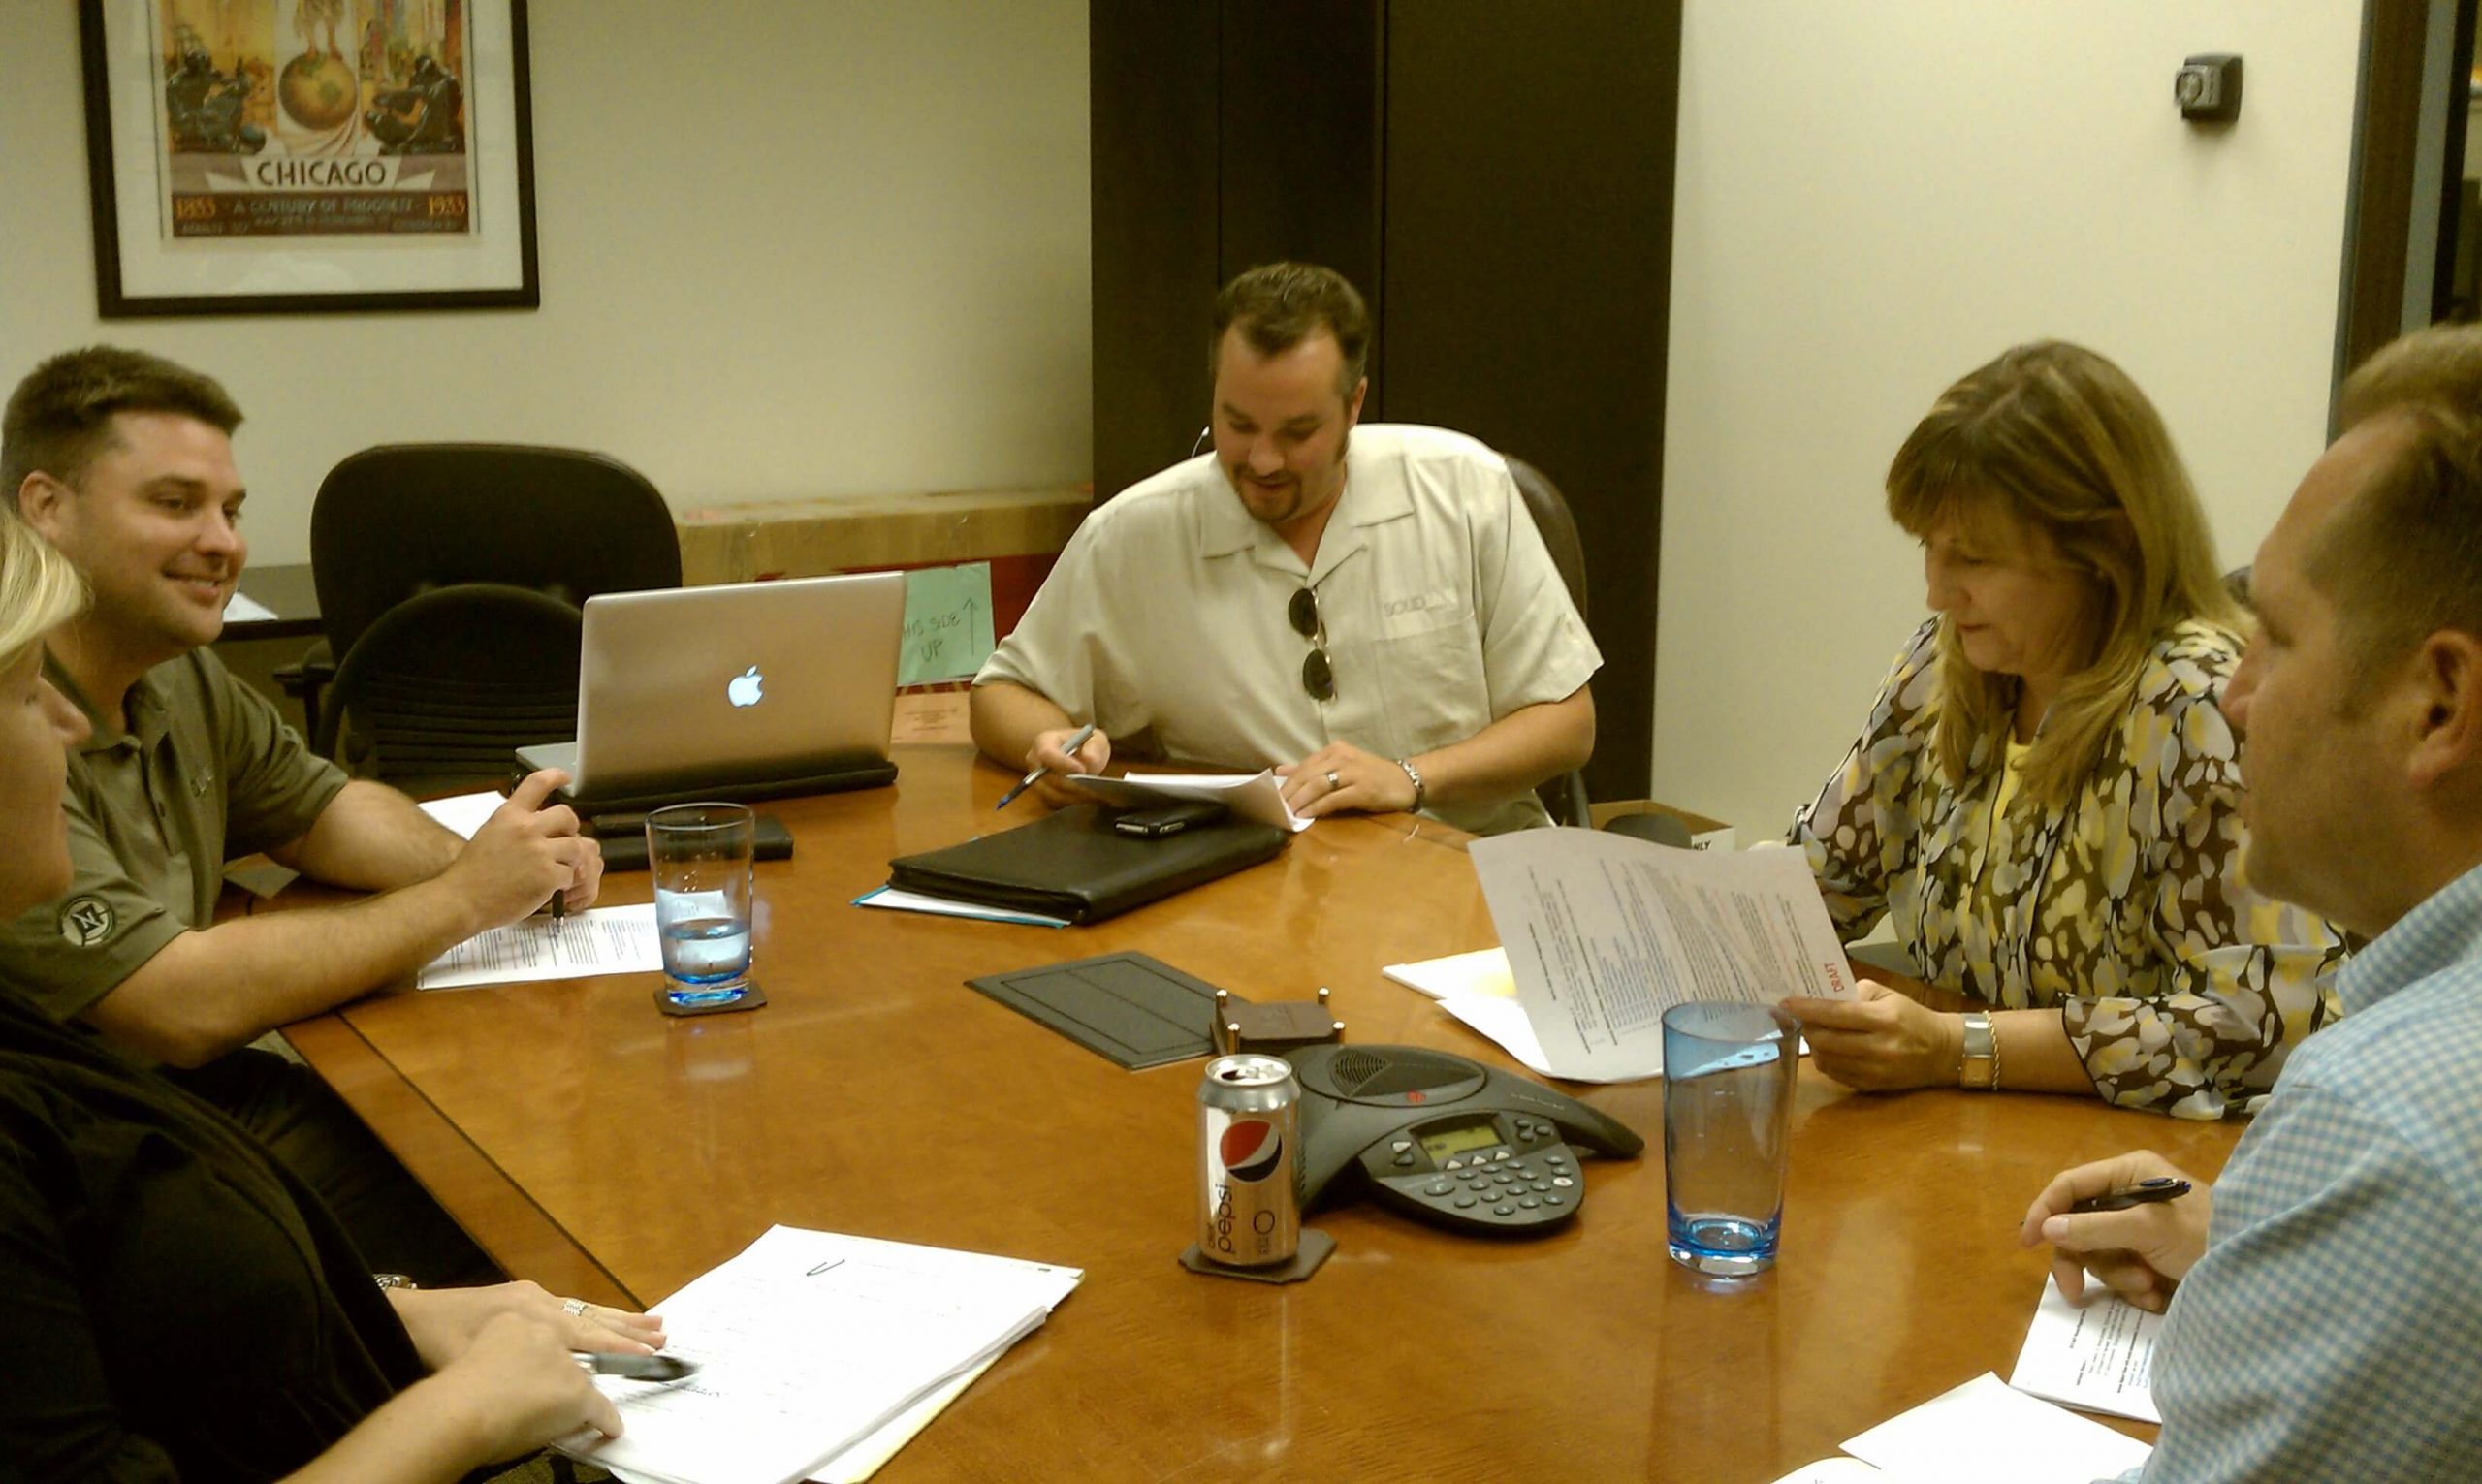 Talking about the awards show SolidLine is producing in San Francisco with the AOF staff!